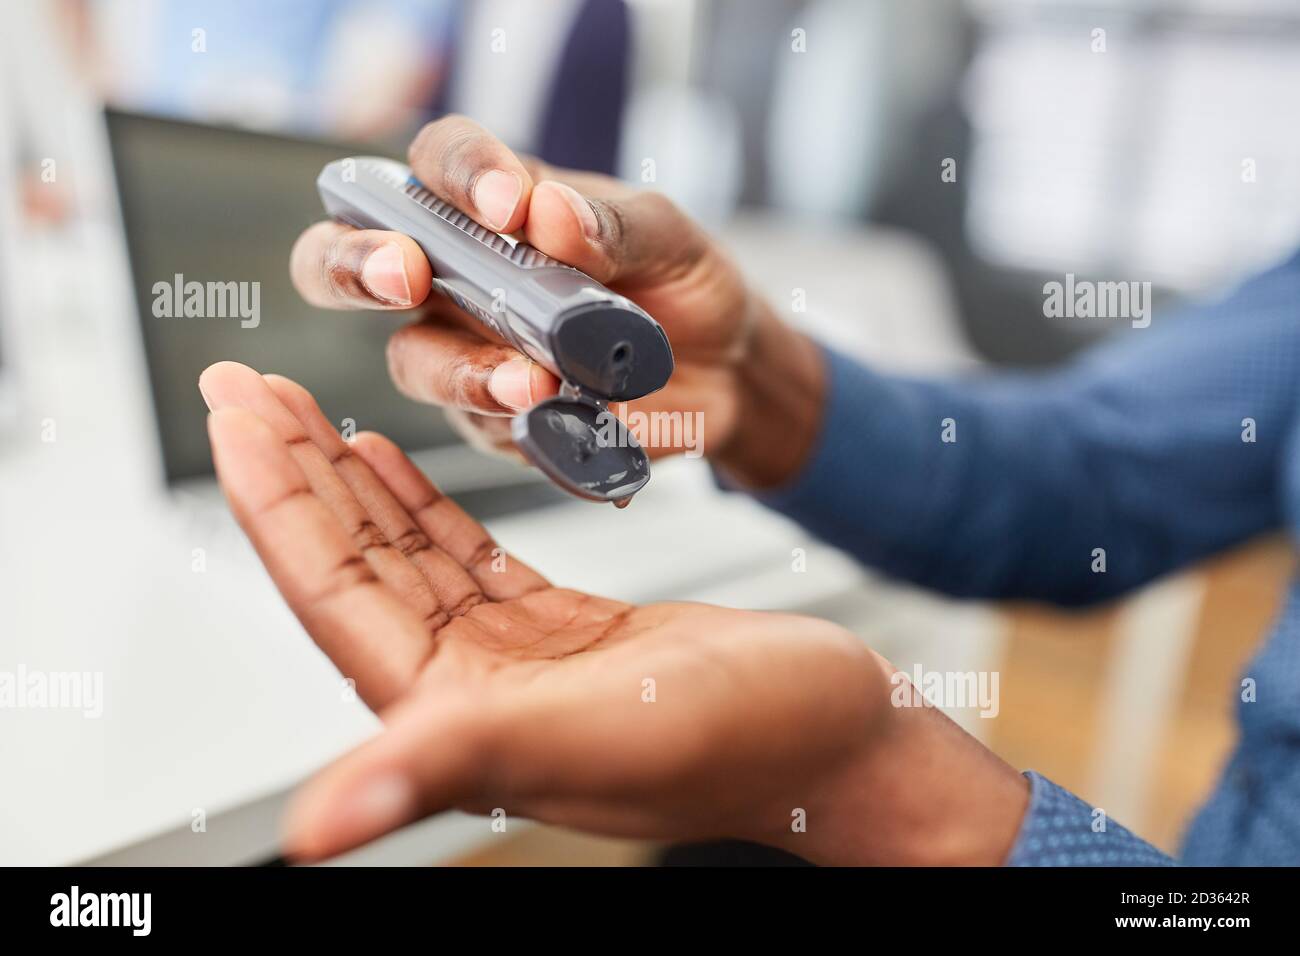 Hands of business man disinfecting with disinfectant Stock Photo